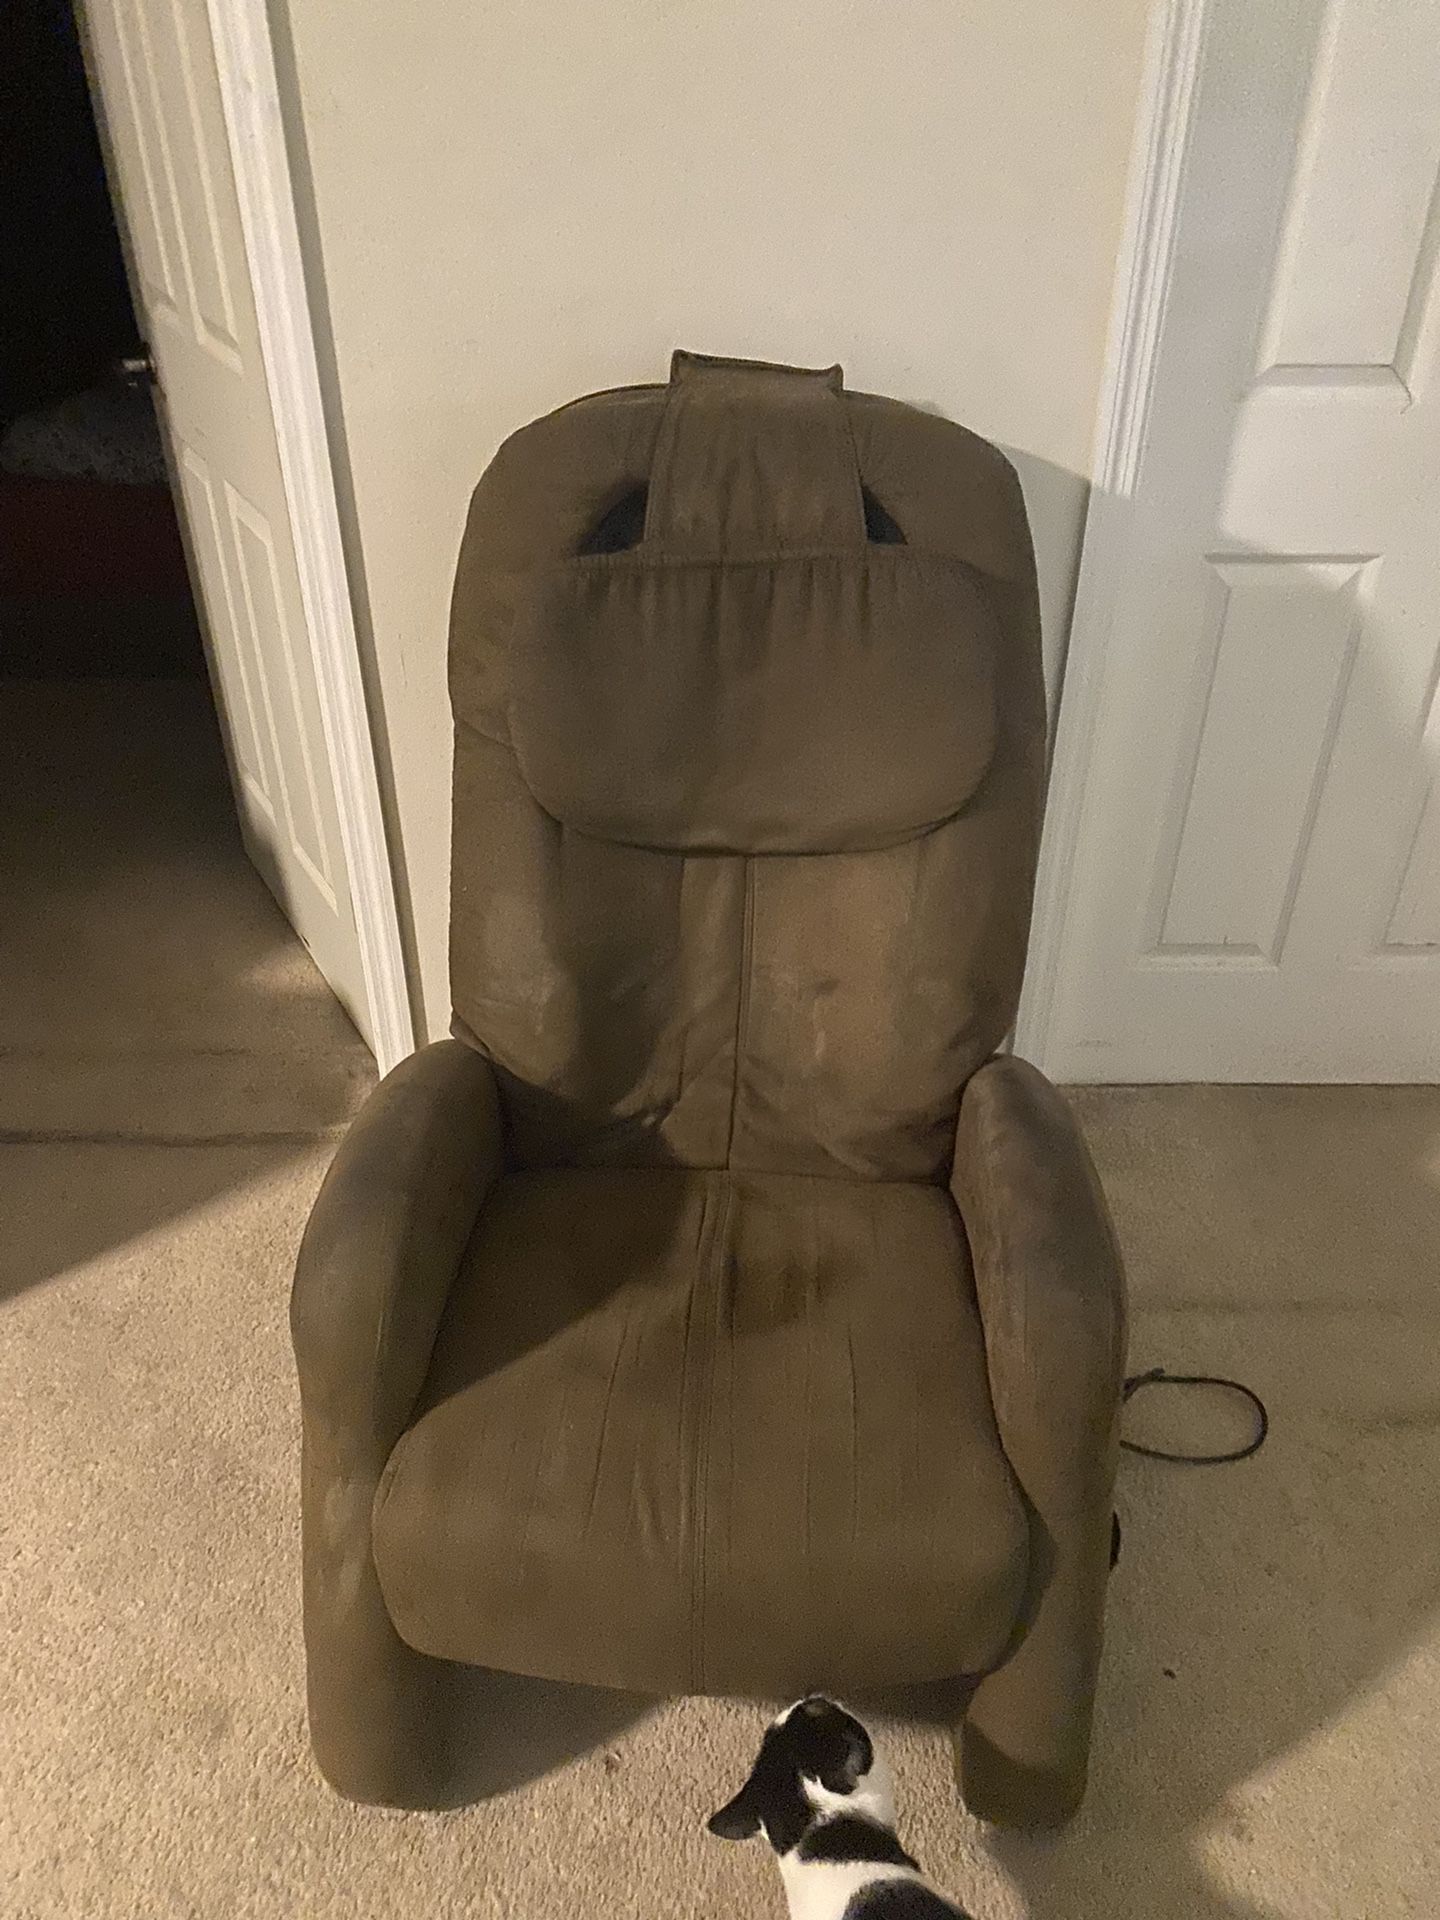 IJoy-105 Massage Chair, Brown Faux Suede